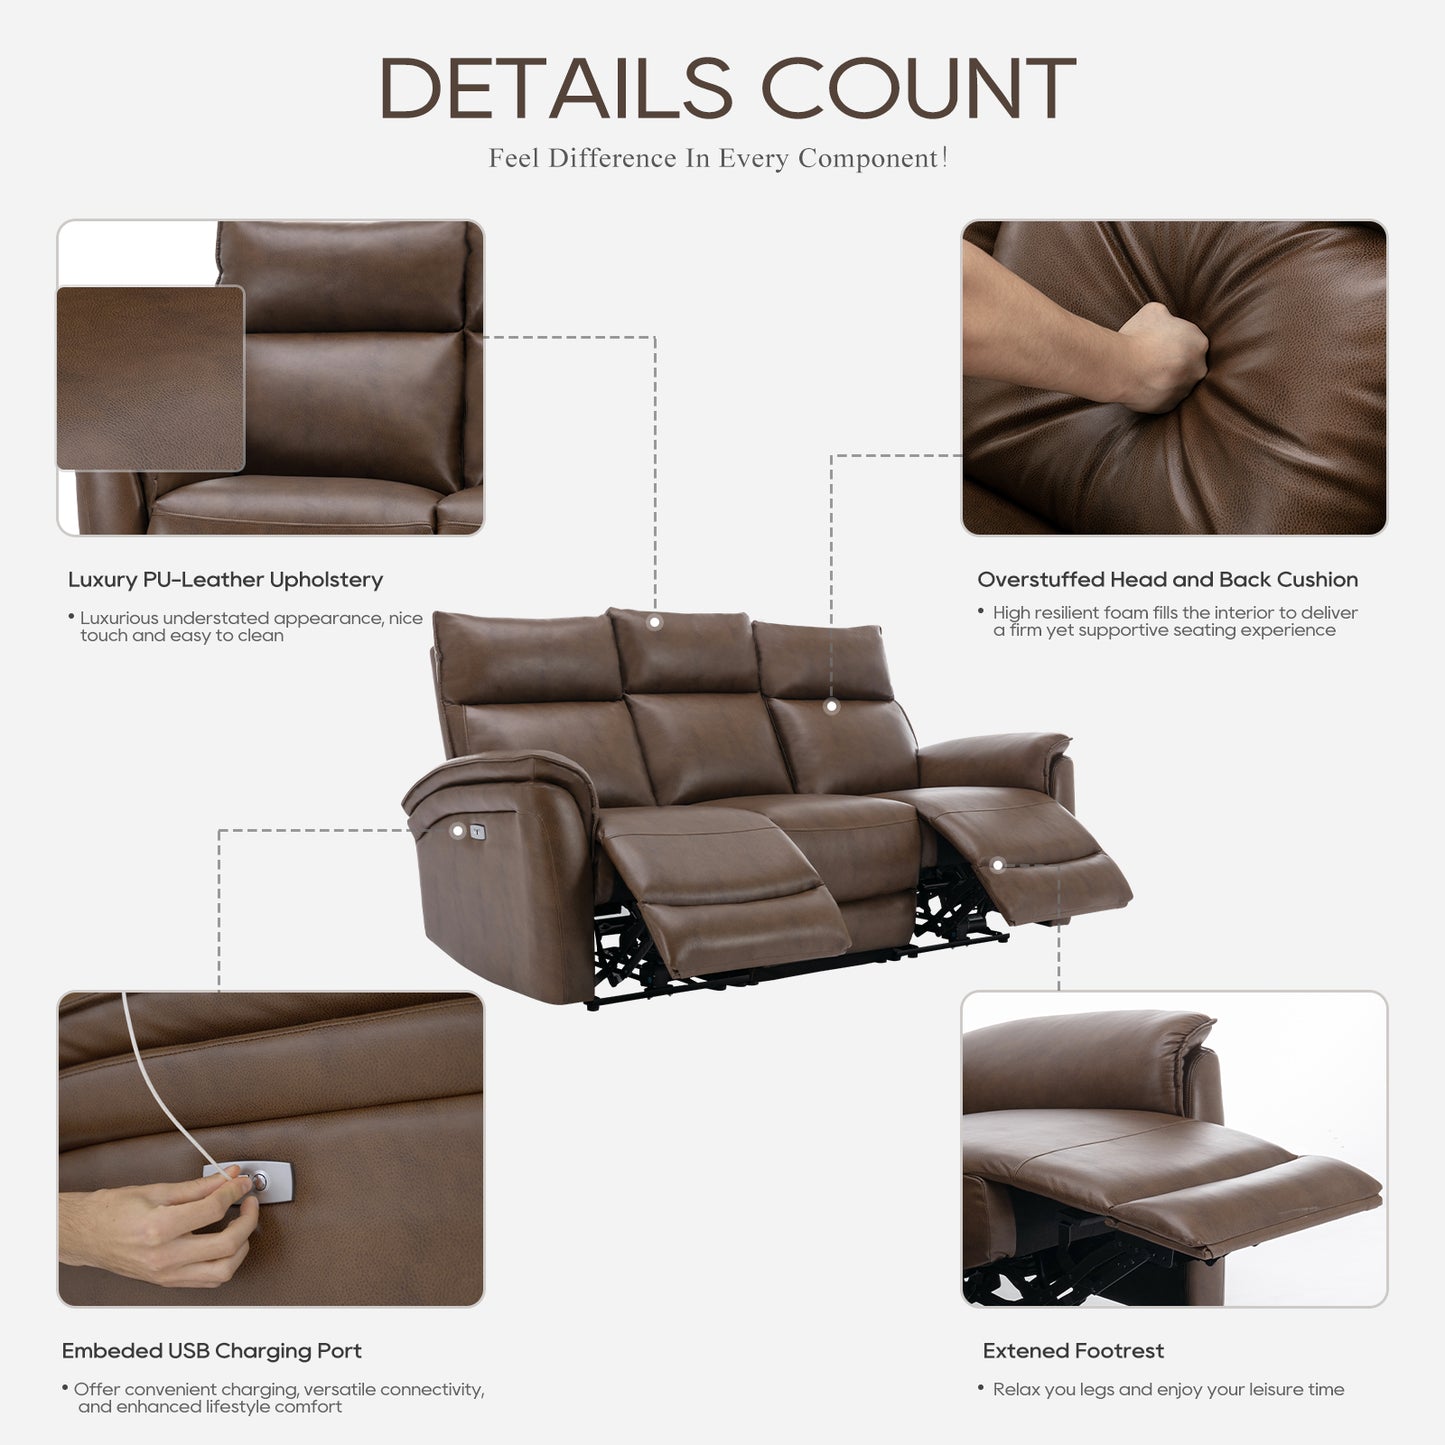 COLAMY PU Leather Dark Brown Power Reclining 3-Seat Home Theater Seating Sofa model.60439